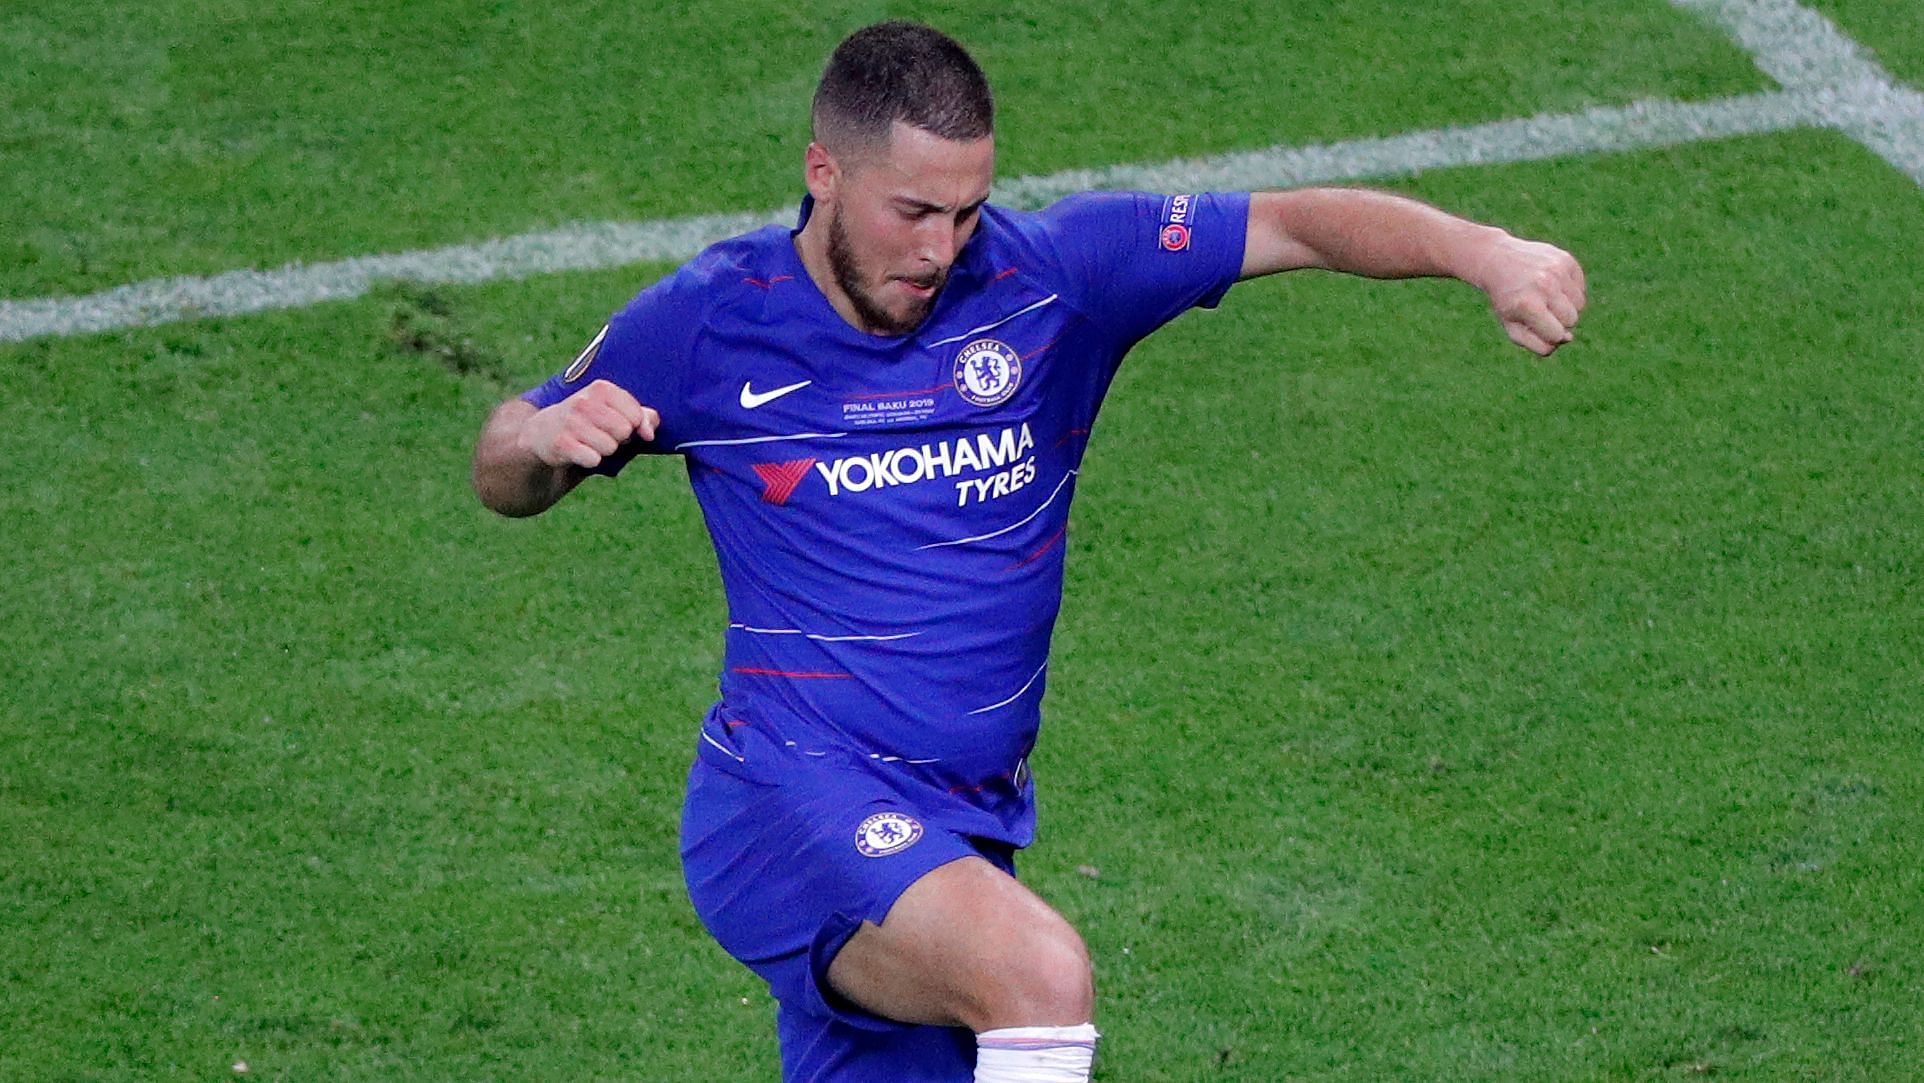 Chelsea’s Eden Hazard celebrates after scoring his team’s fourth goal during the Europa League Final  match between Chelsea and Arsenal at the Olympic stadium in Baku, Azerbaijan on Wednesday